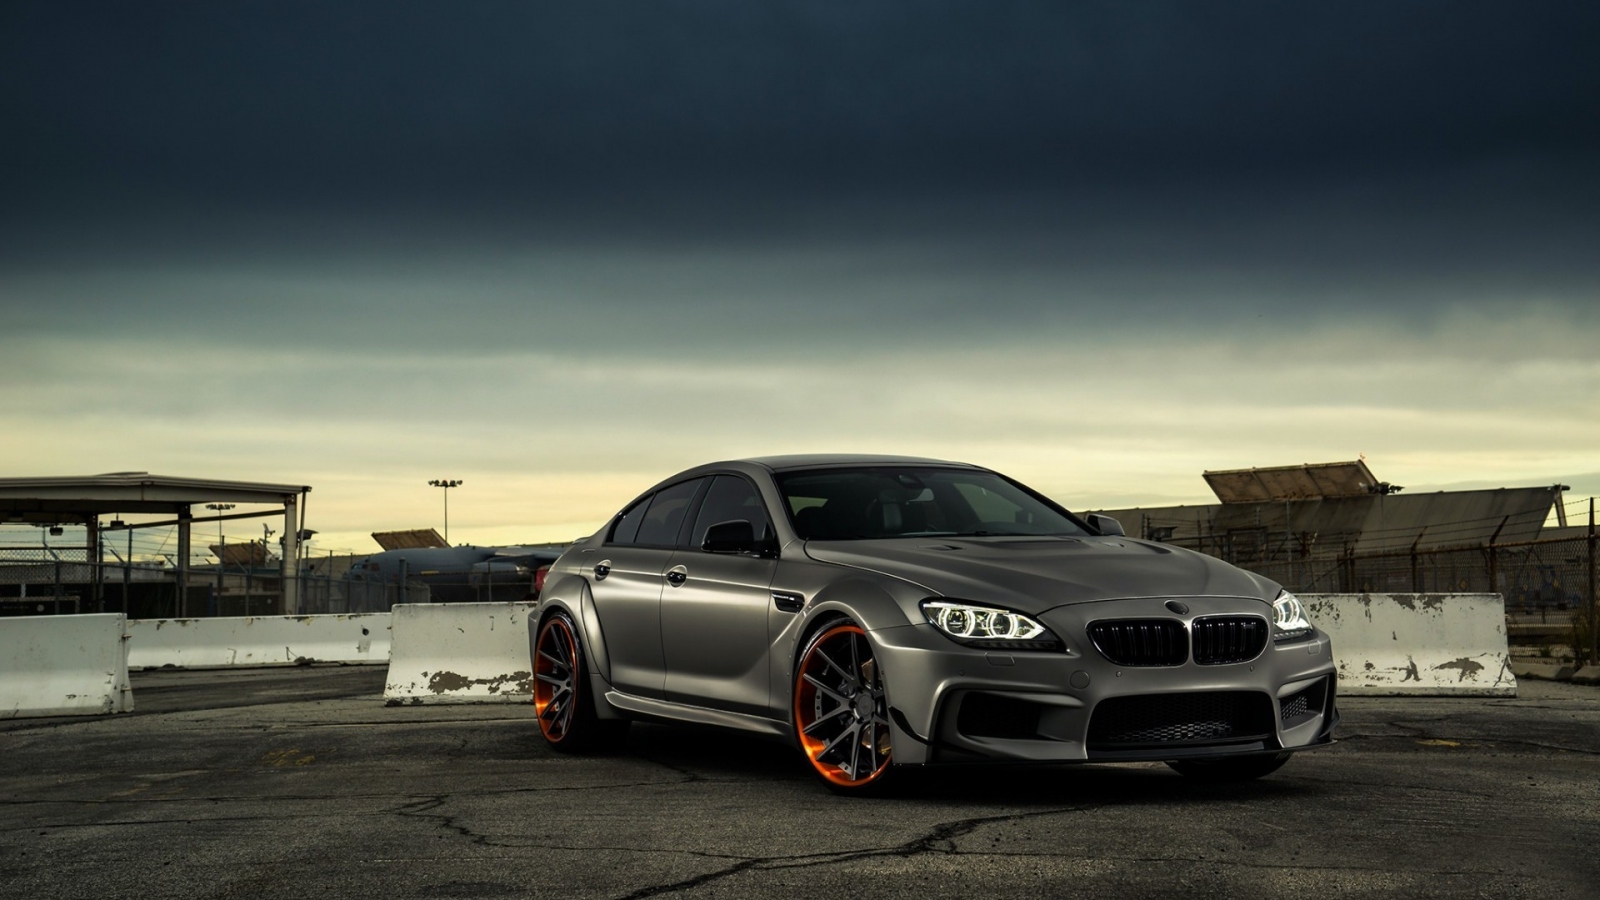 Gorgeous BMW M6 for 1600 x 900 HDTV resolution